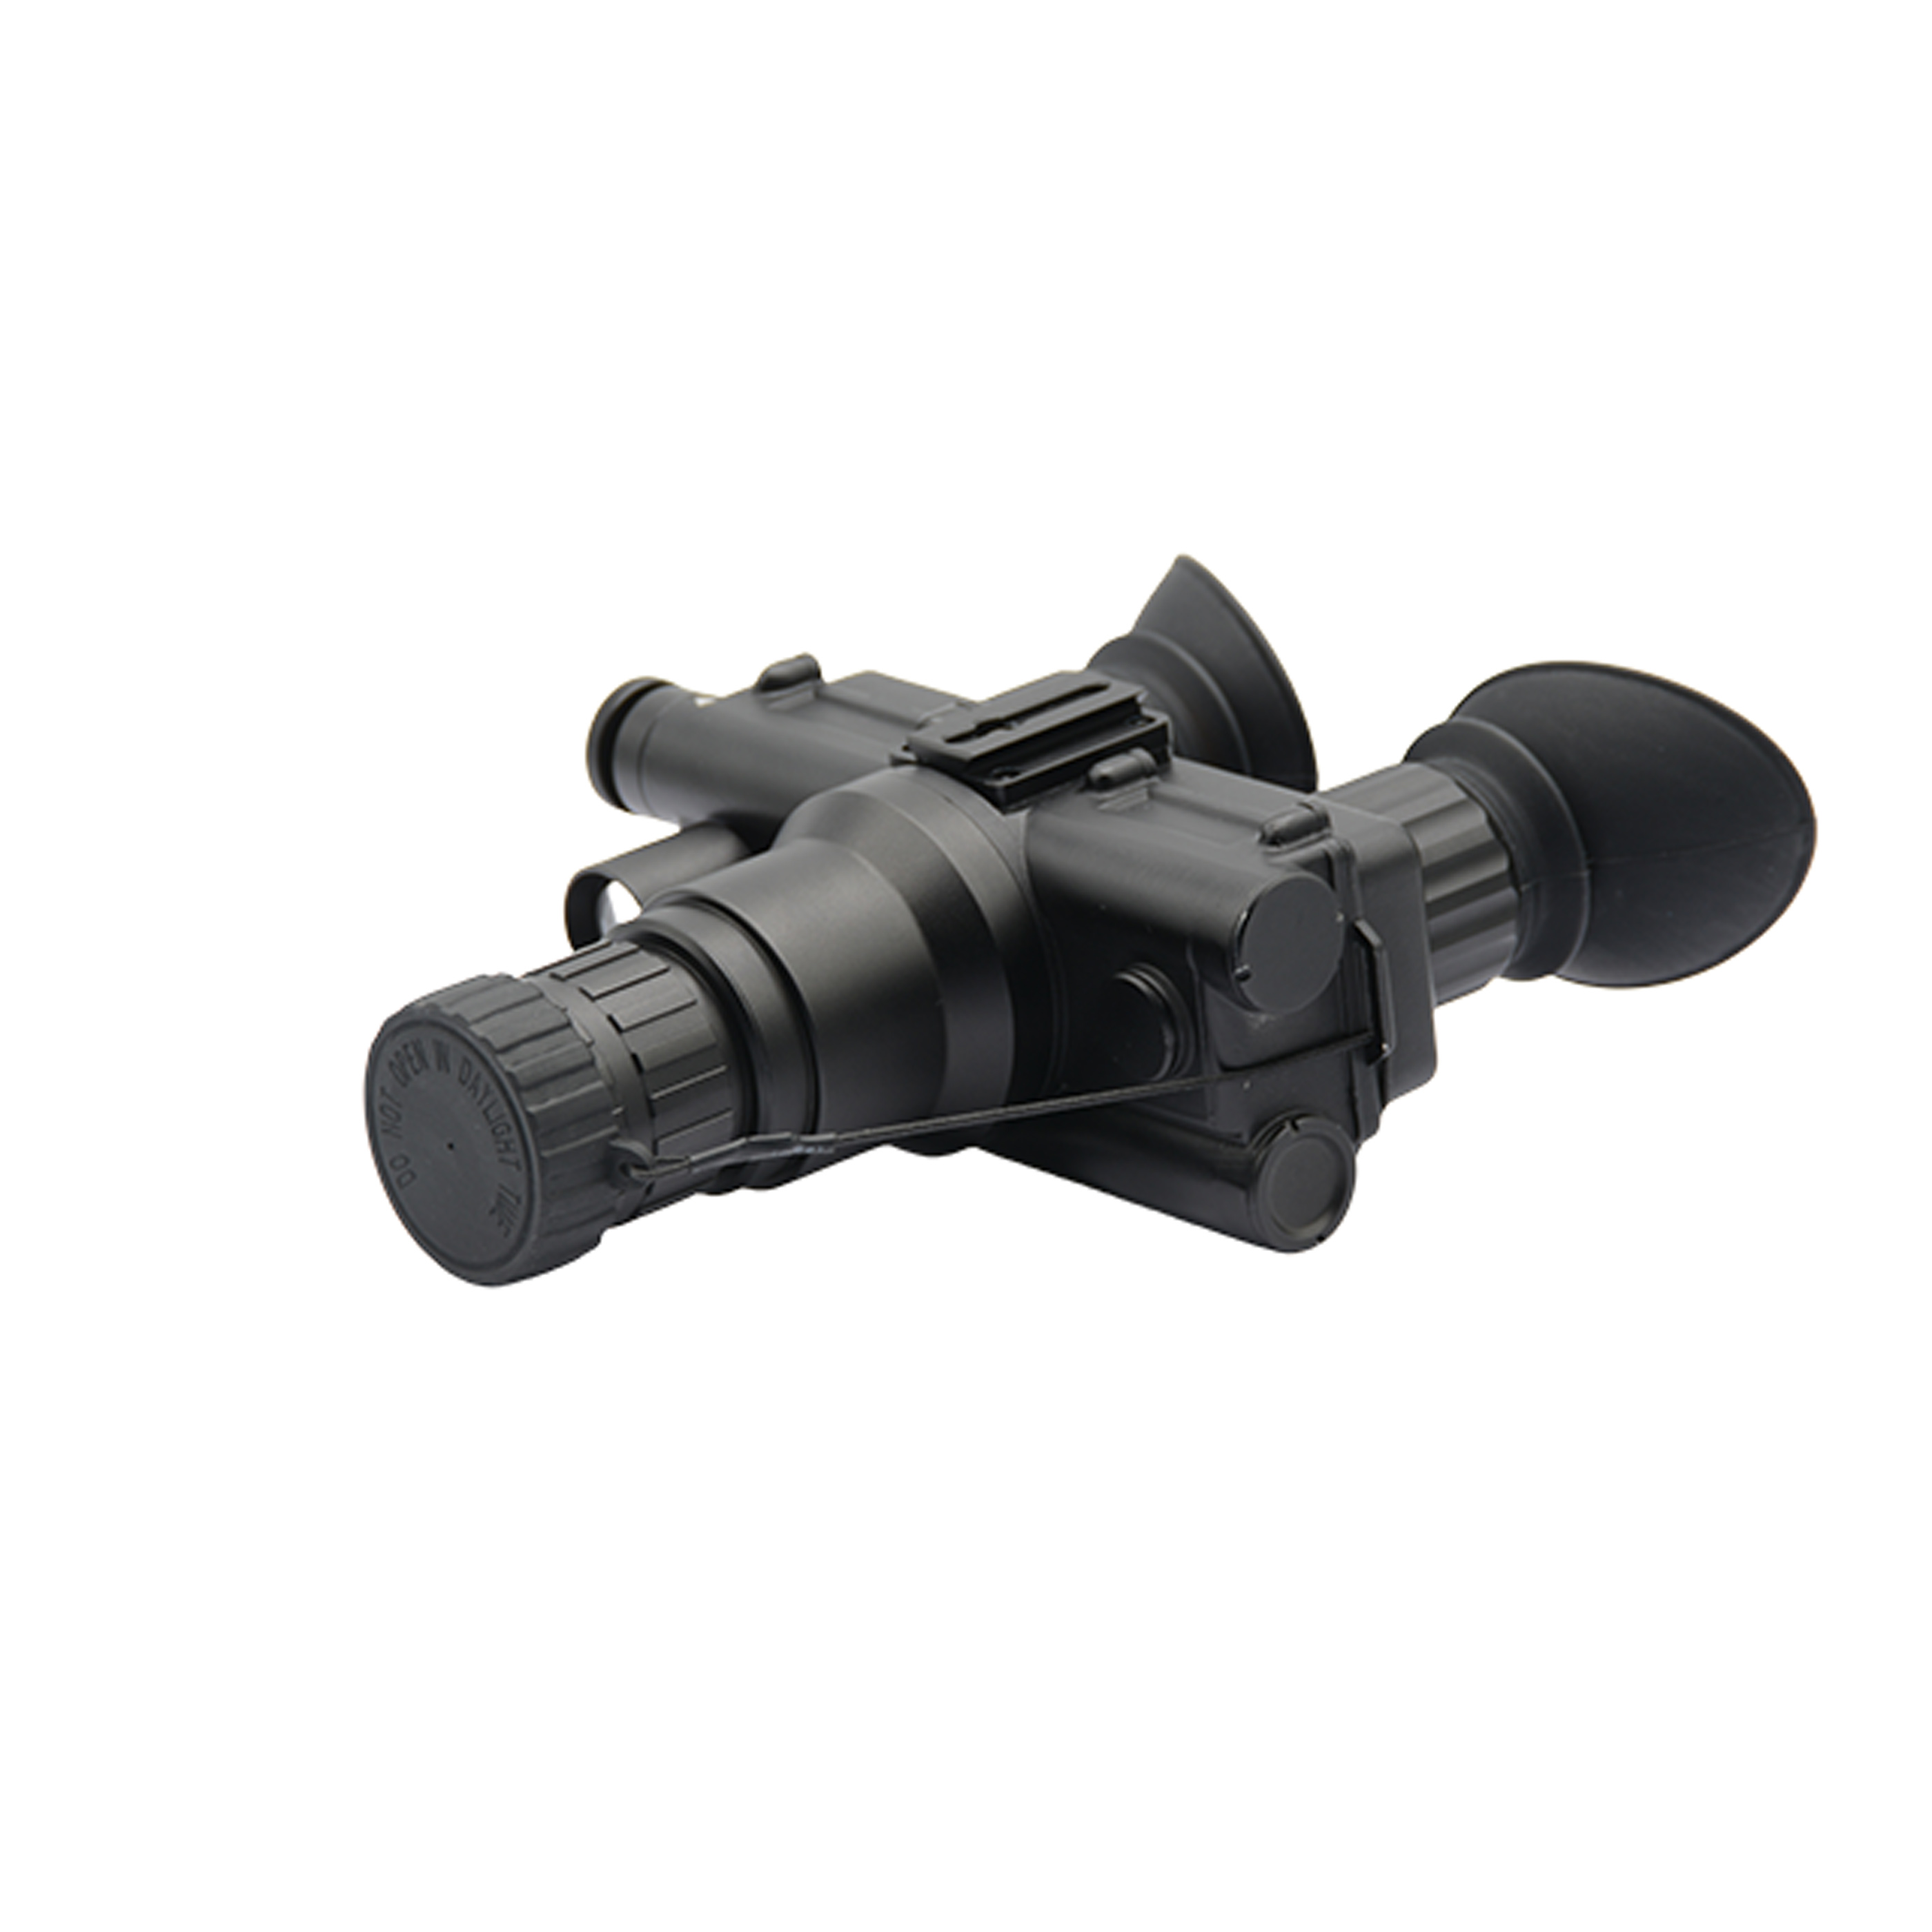 Video Output and Eyepiece Distance Adjustable  Military Night Vision Goggles Featured Image